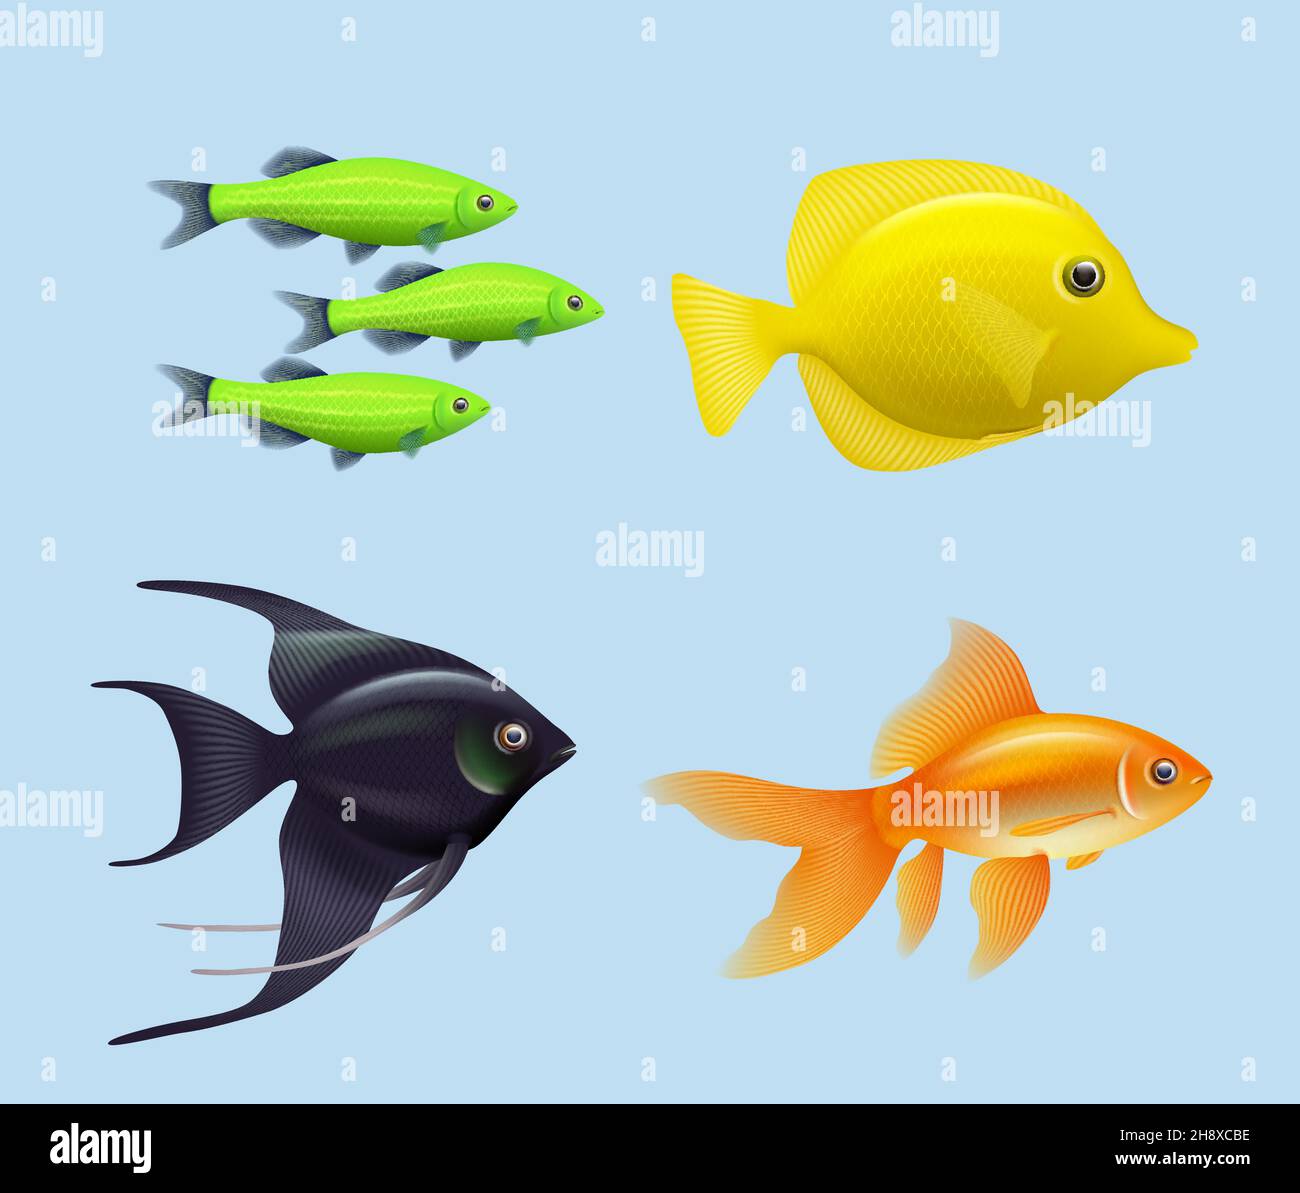 https://c8.alamy.com/comp/2H8XCBE/exotic-fishes-realistic-underwater-life-aquarium-drawing-colored-fishes-decent-vector-illustration-collection-isolated-2H8XCBE.jpg